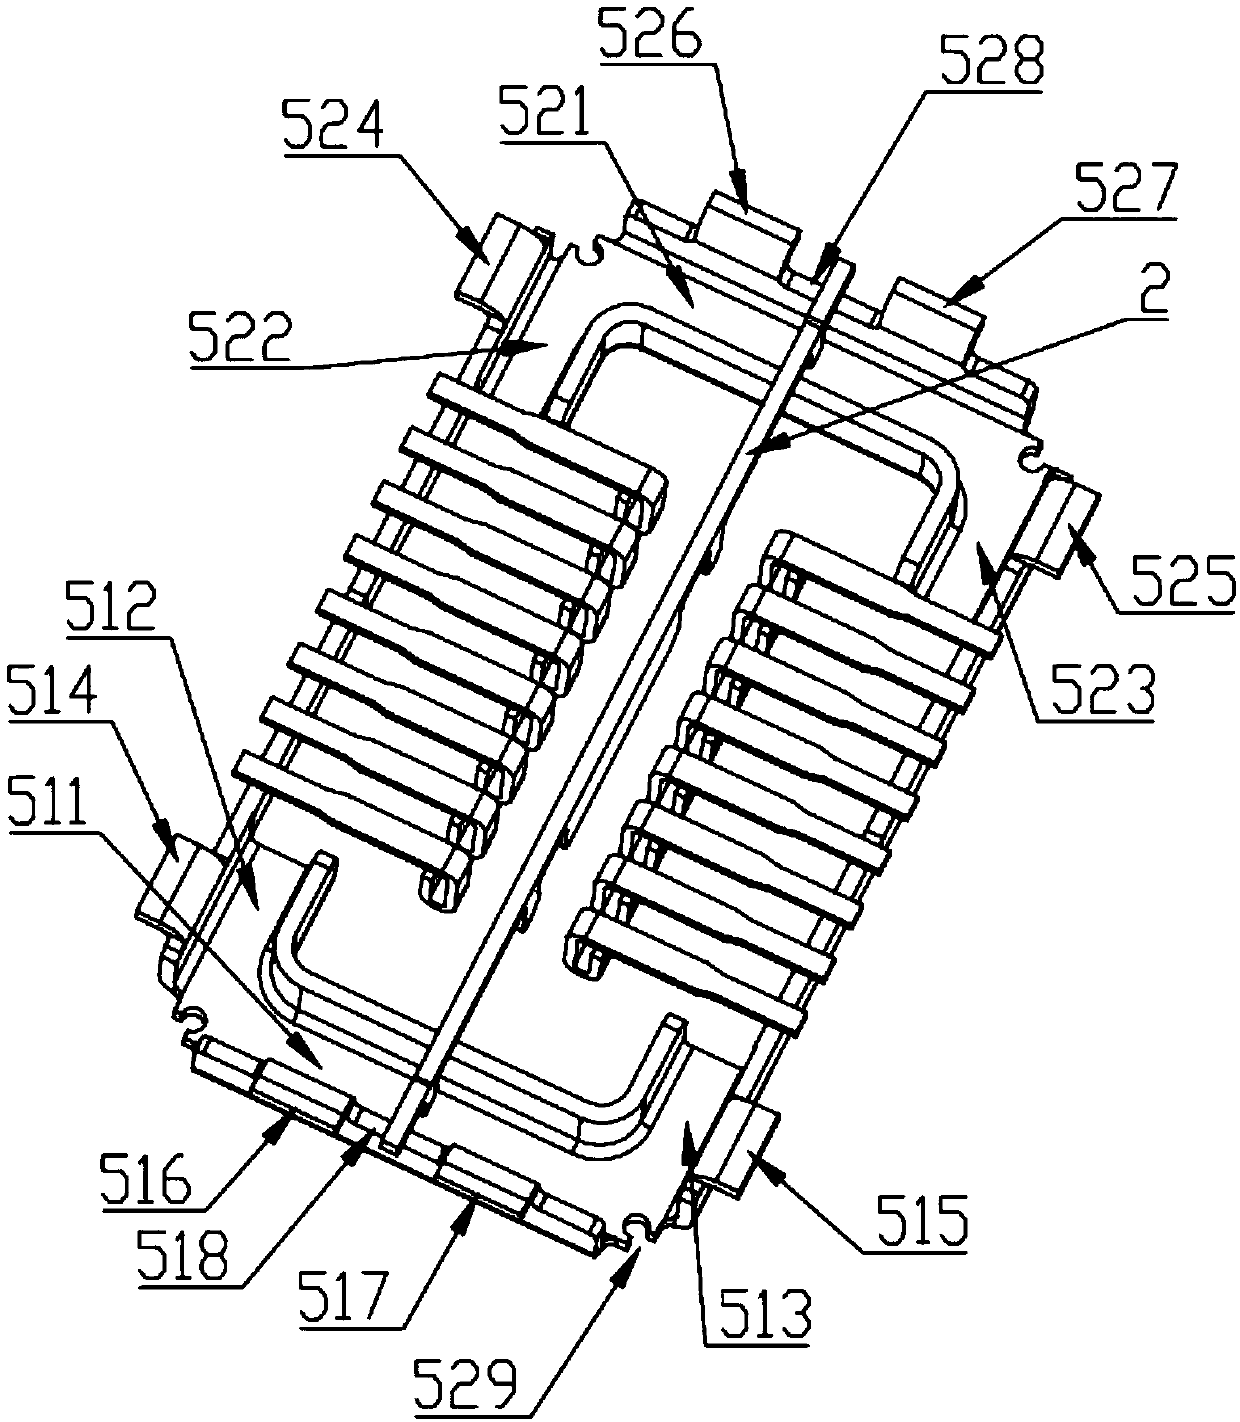 Connector component